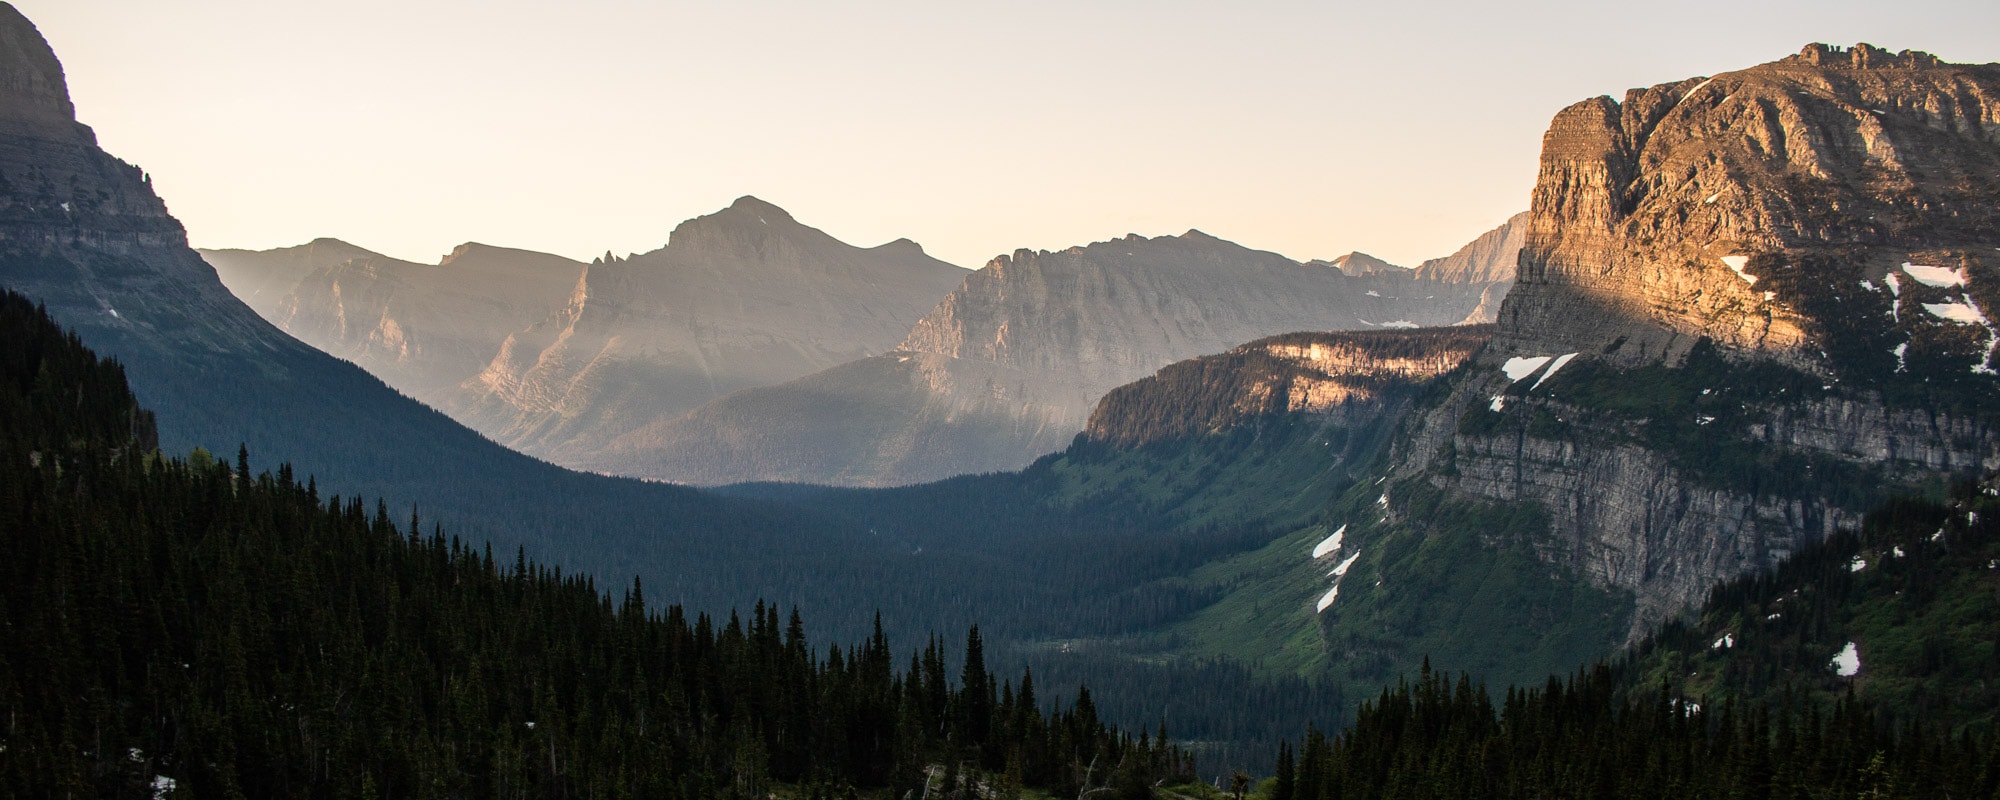 Glacier National Park - Going-to-the-Sun Road sunrise